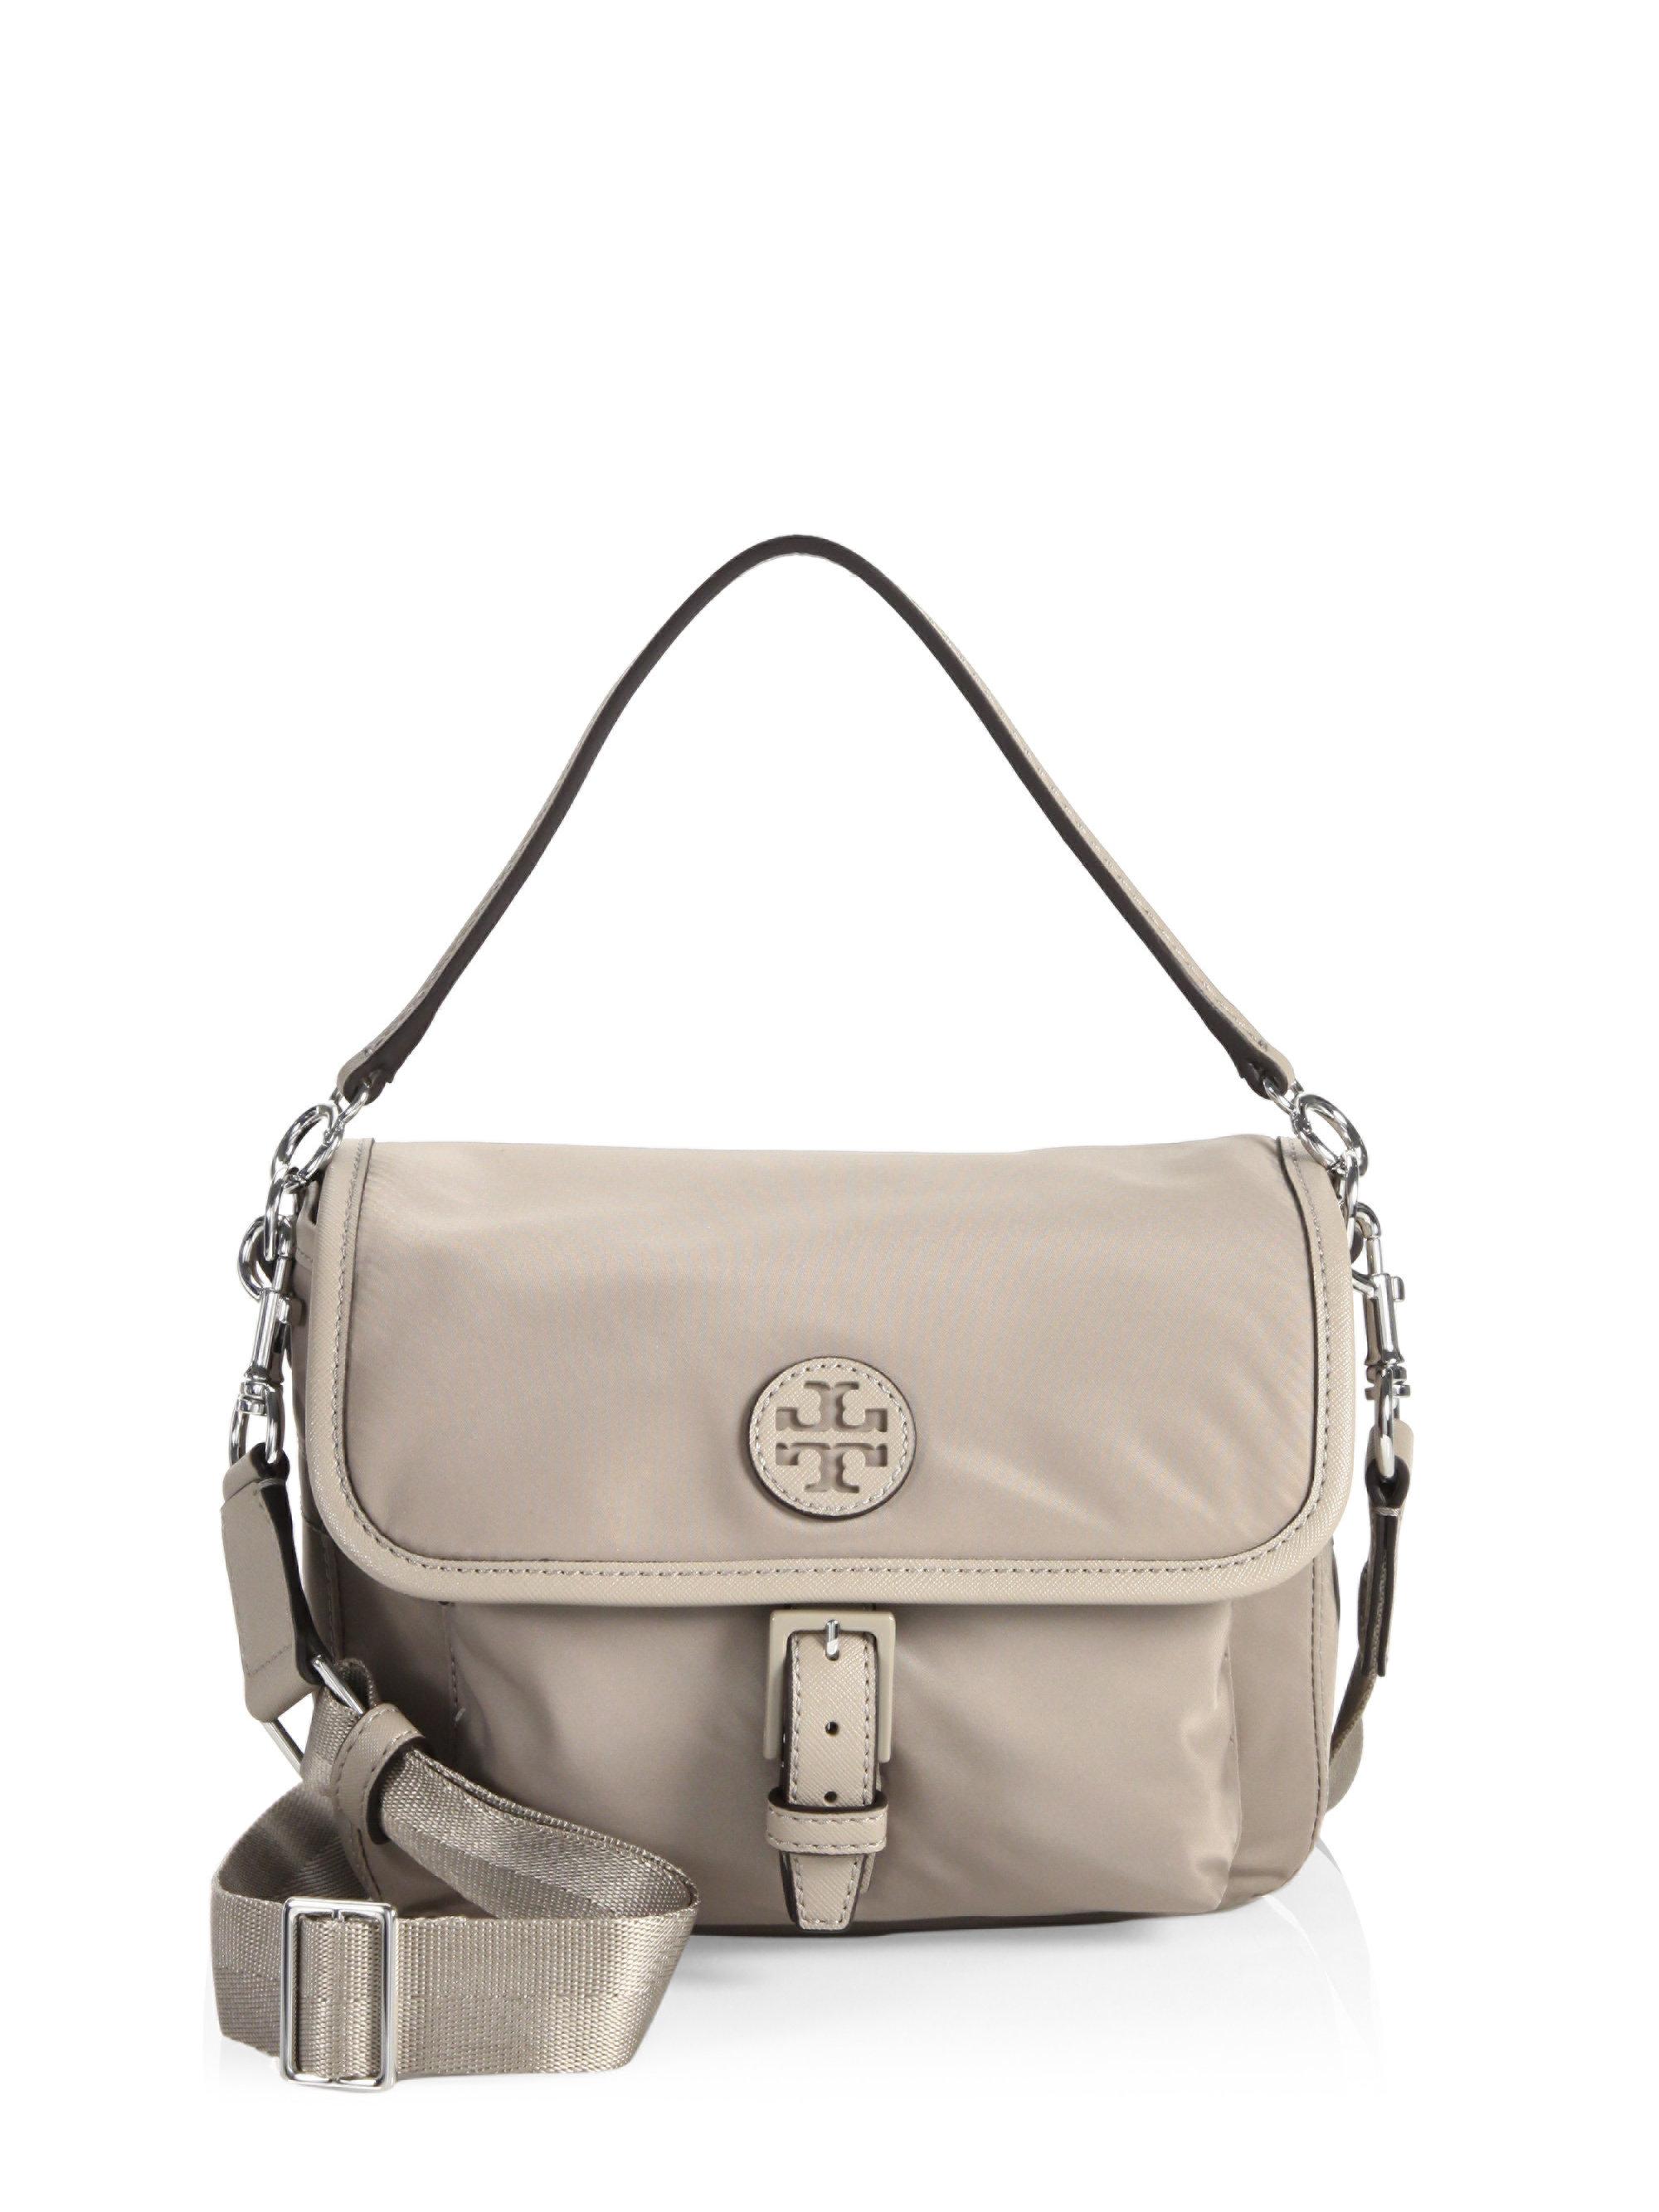 Tory Burch Synthetic Scout Nylon Crossbody Bag in French Grey 